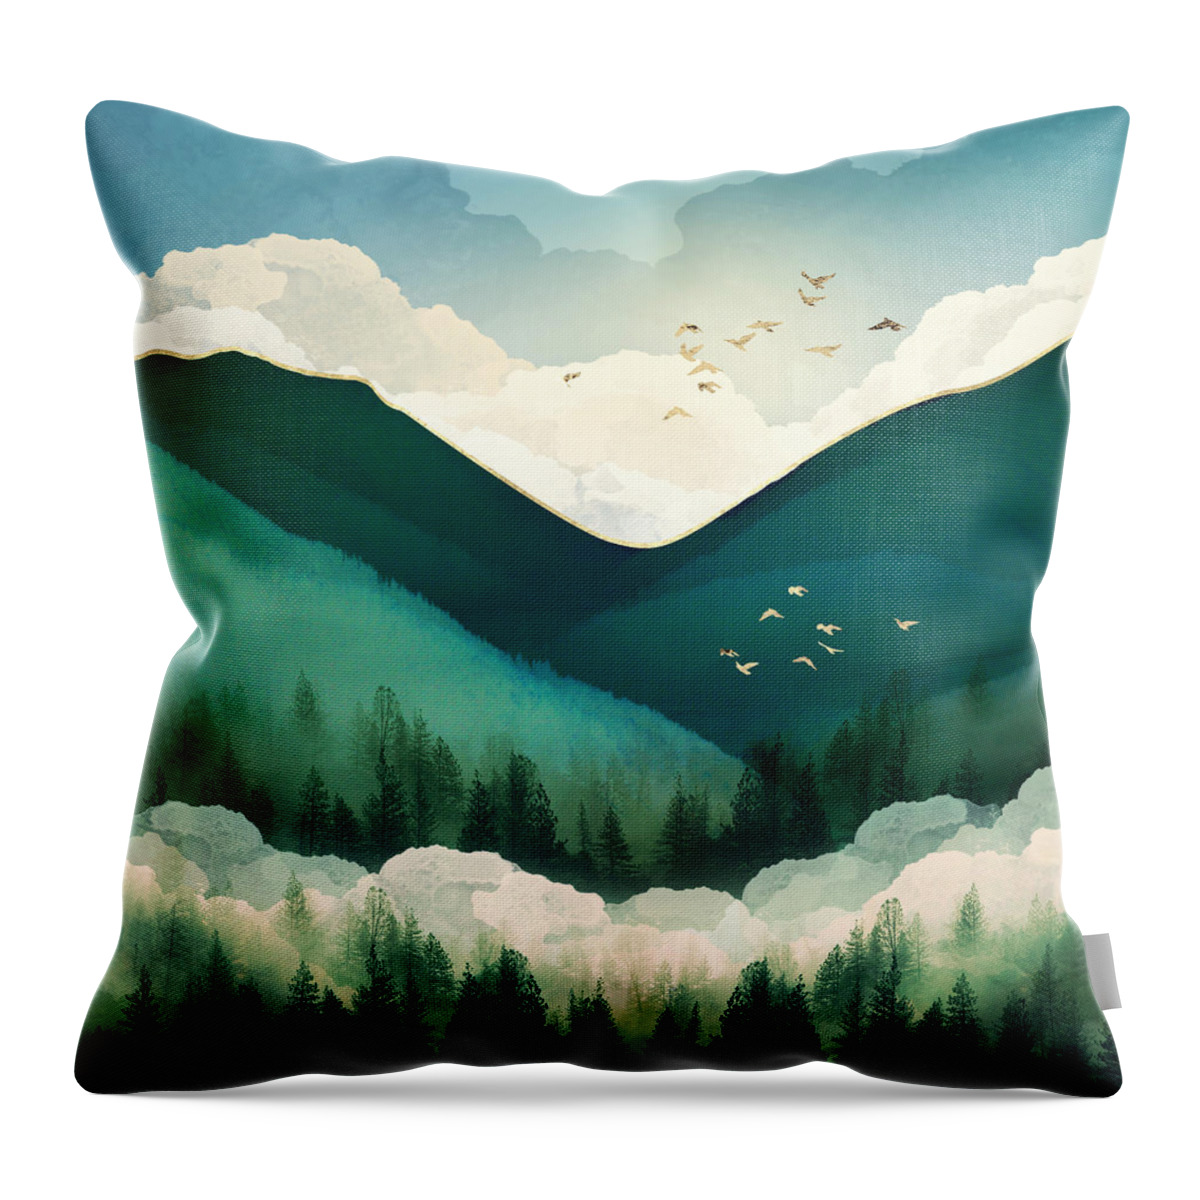 Emerald Throw Pillow featuring the digital art Emerald Hills by Spacefrog Designs